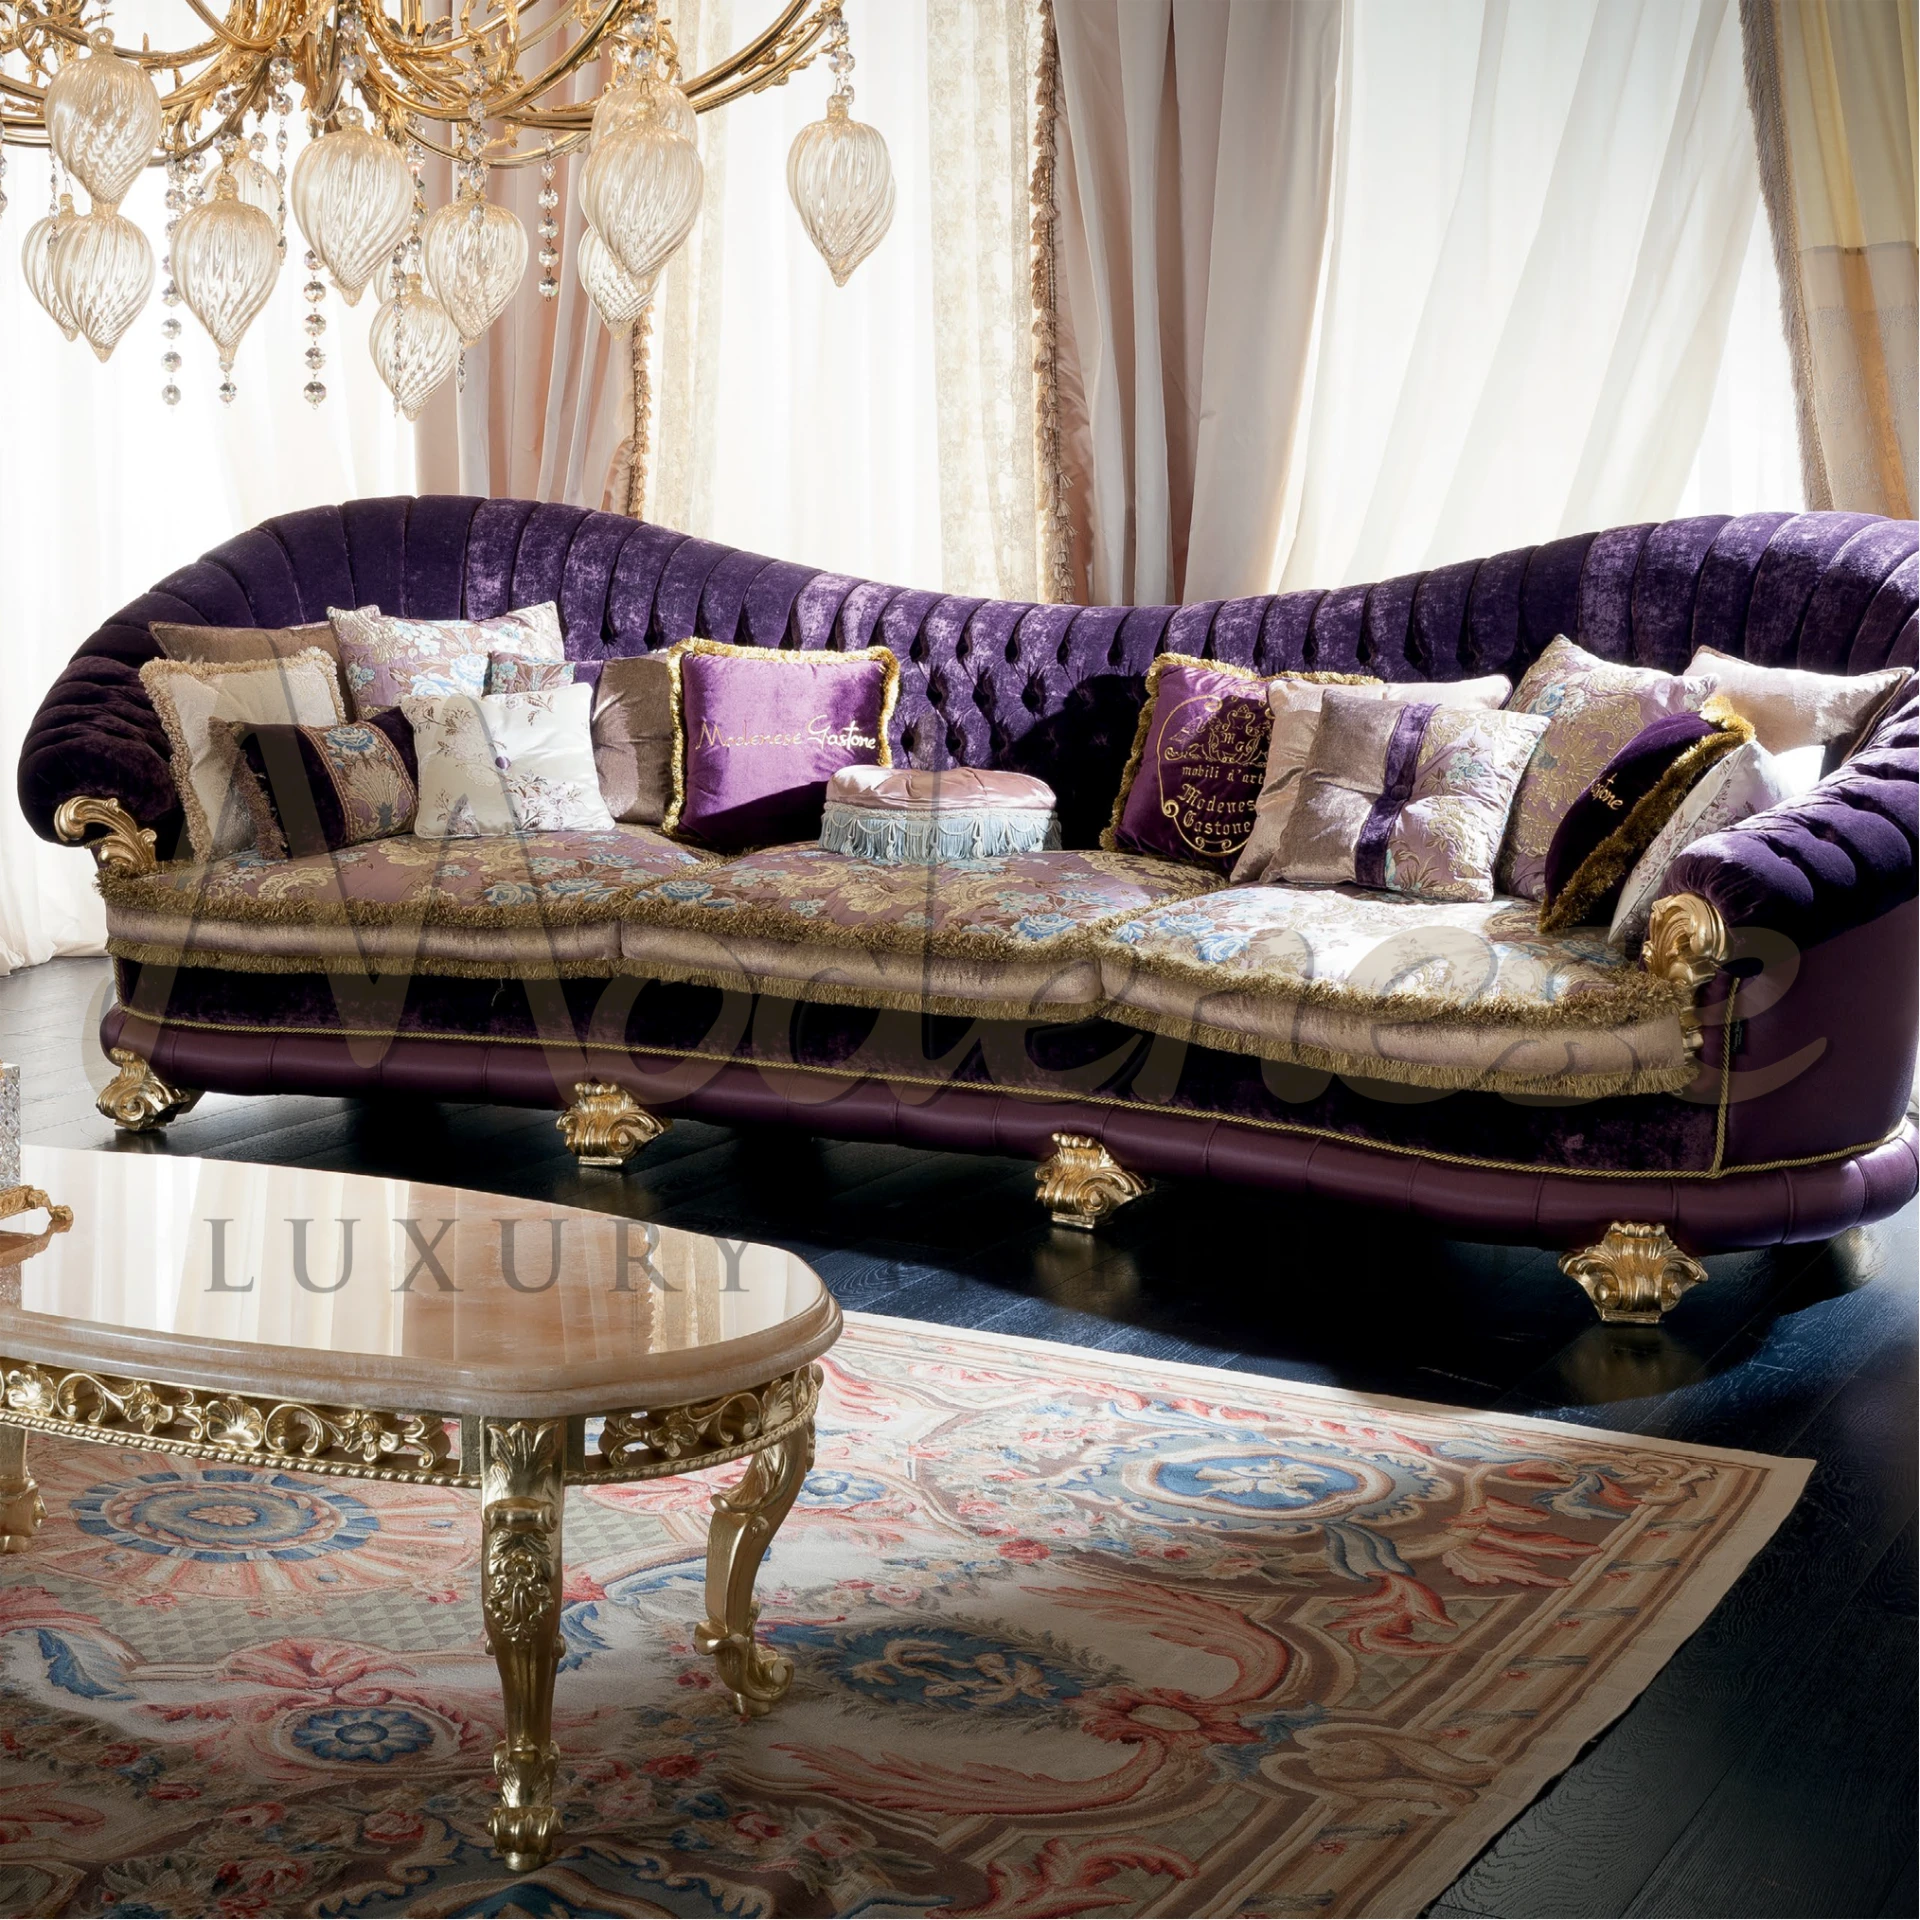 Luxury cushion crafted in Italy, showcasing Modenese elegance with superior materials and meticulous design.